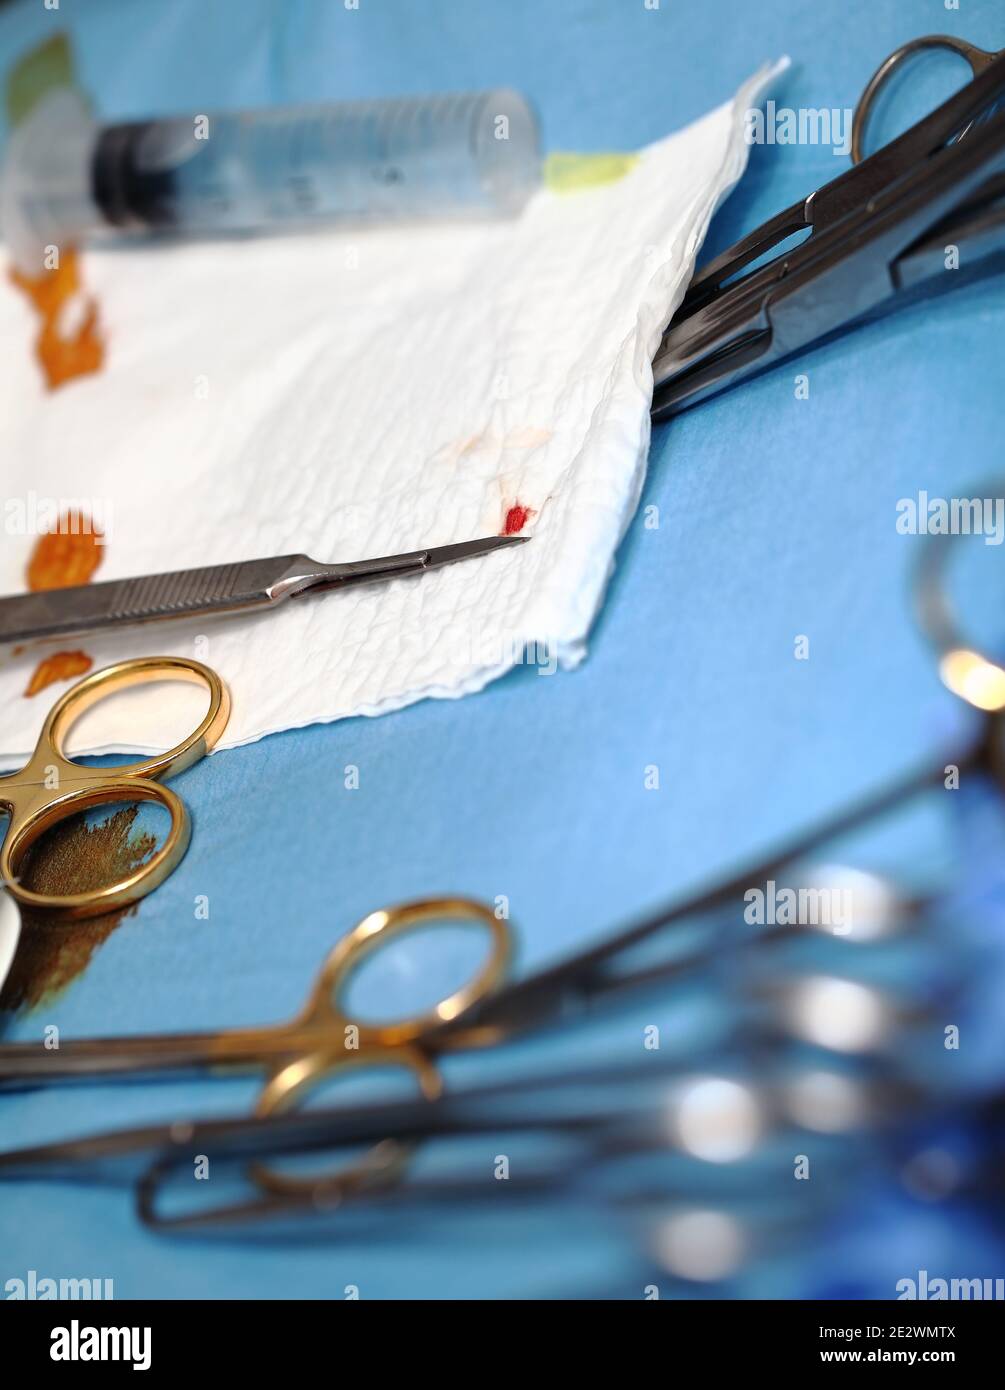 Surgical tools on the drape sheet. Stock Photo